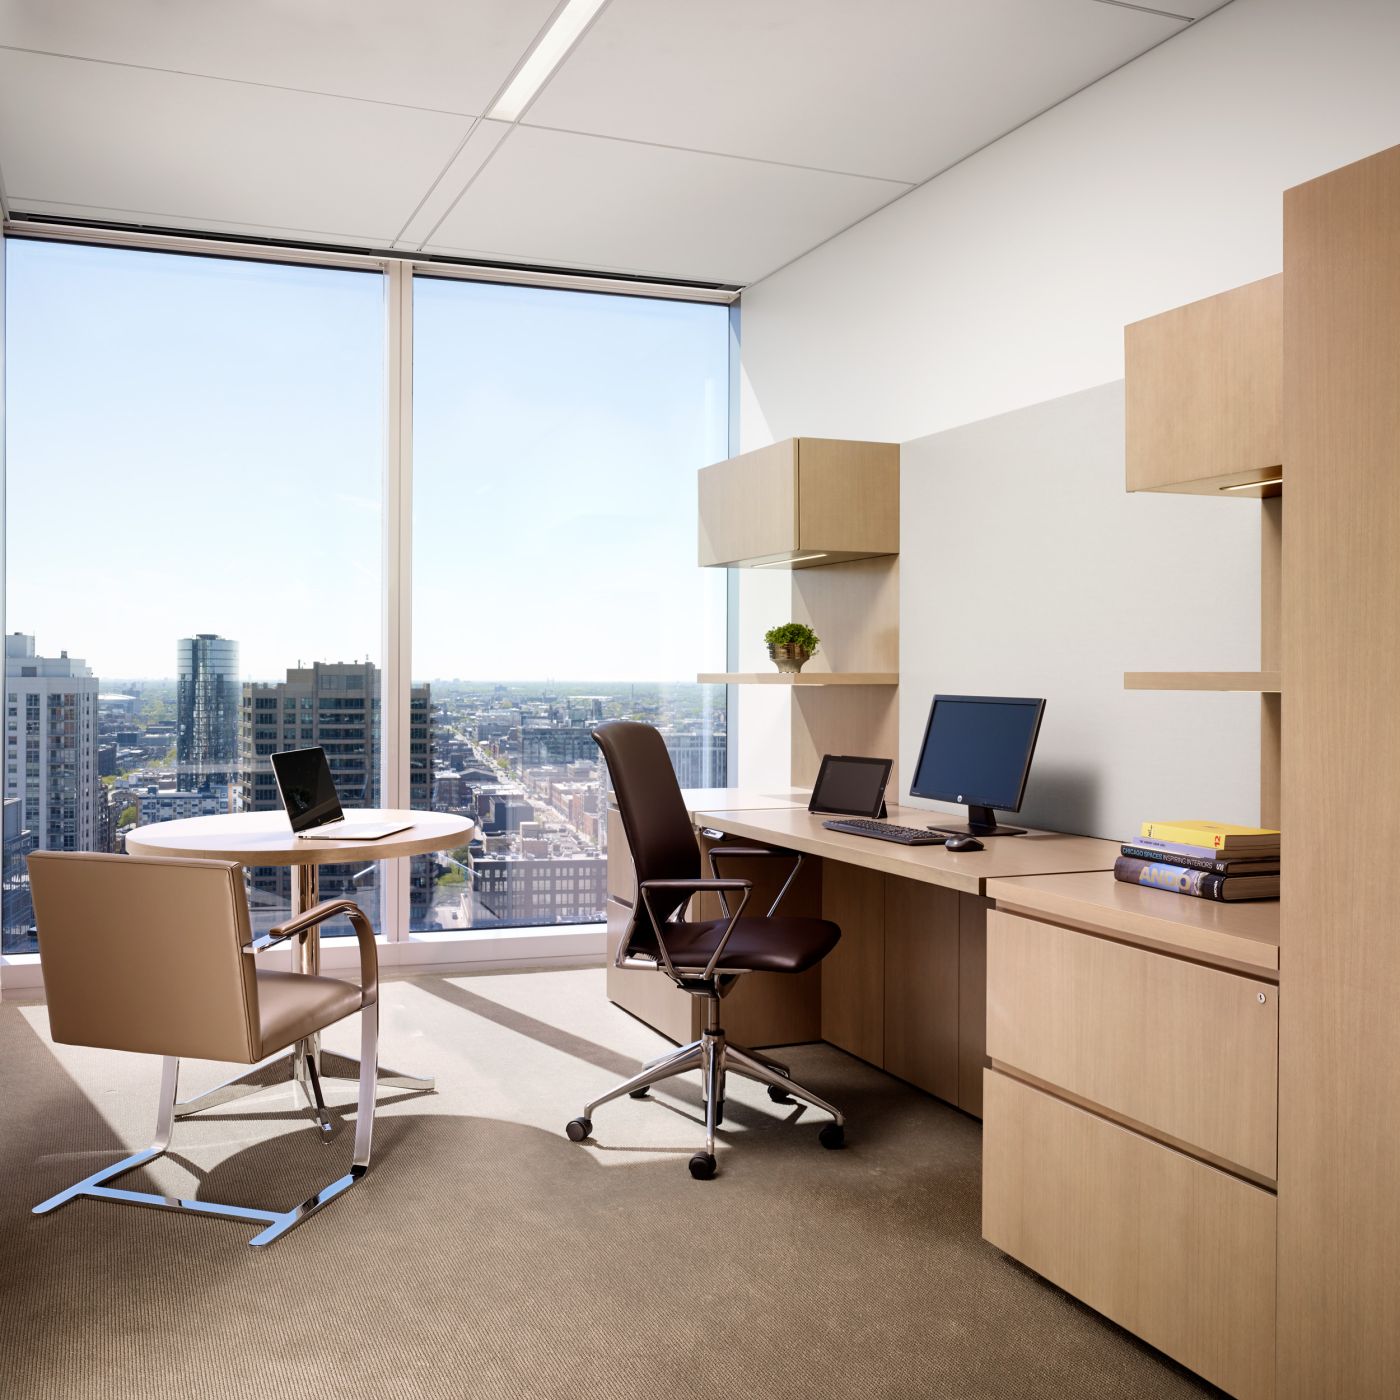 NEW MILLENNIA private office in anigre with an adjustable-height worksurfaces. 36